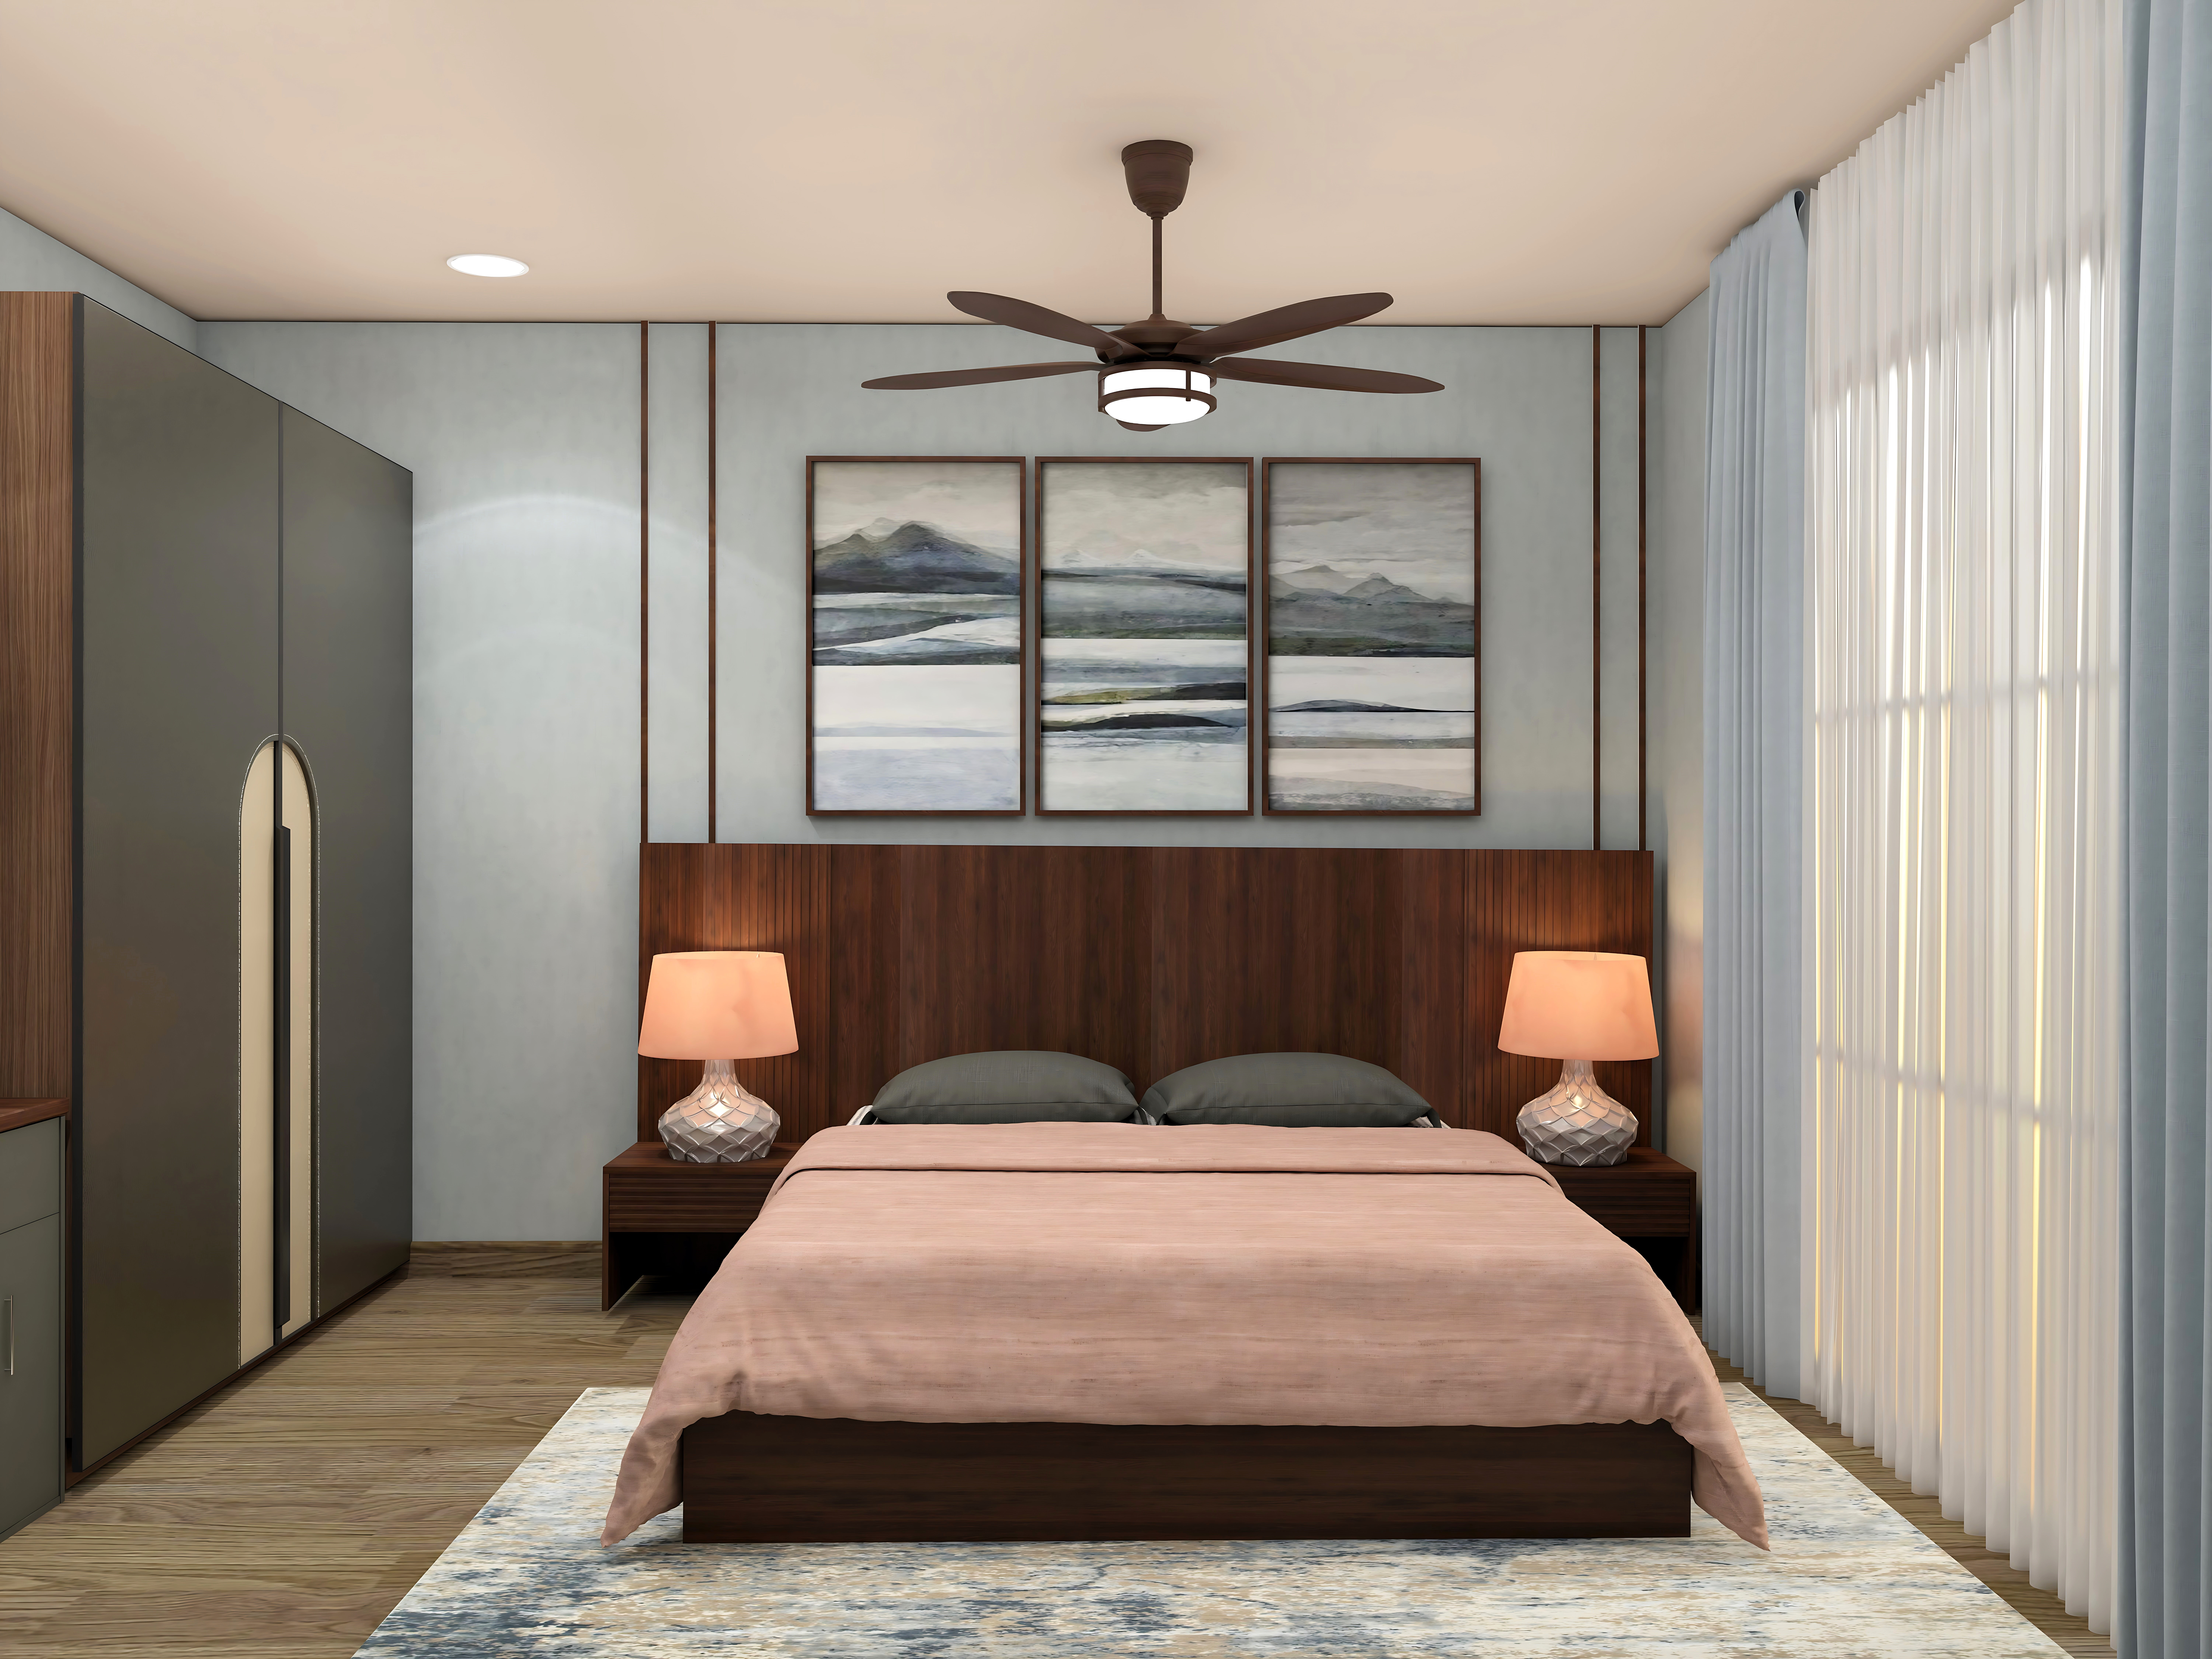 Master bedroom design with wooden headboard and light grey textured walls - Beautiful Homes